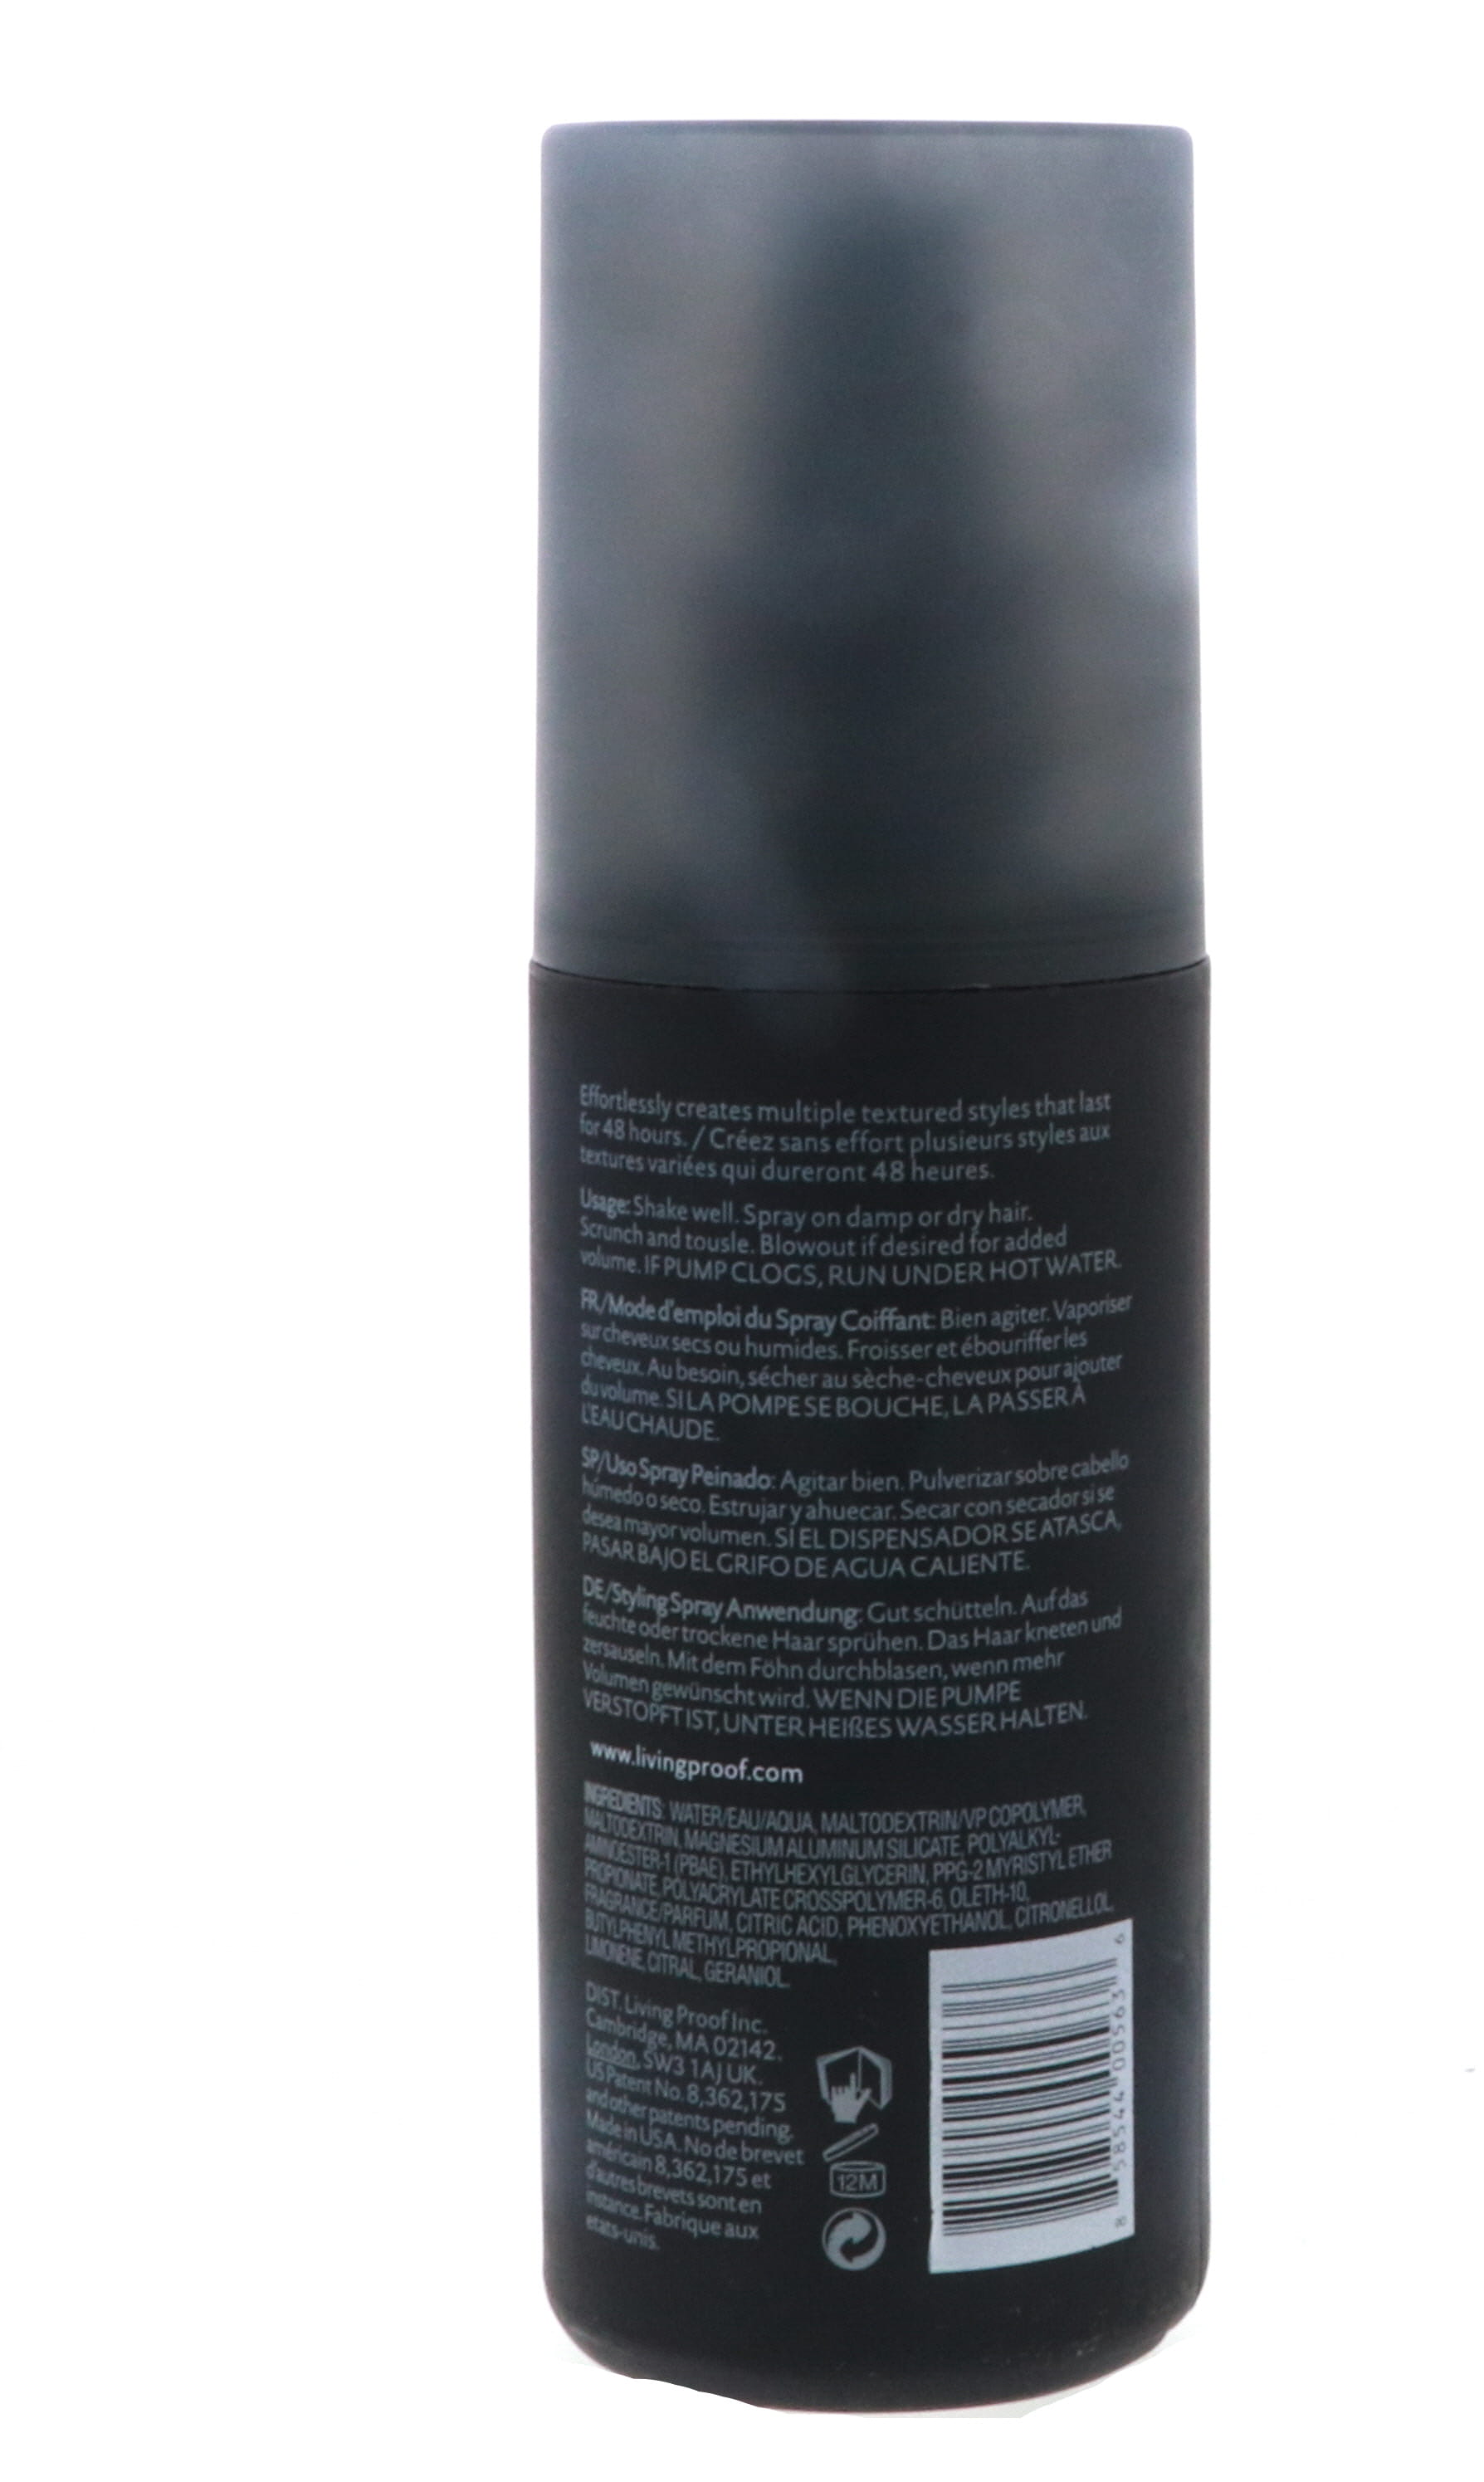 living proof, style lab instant texture mist, for multiple texturized styles use on damp or dry hair 5 oz - image 2 of 3